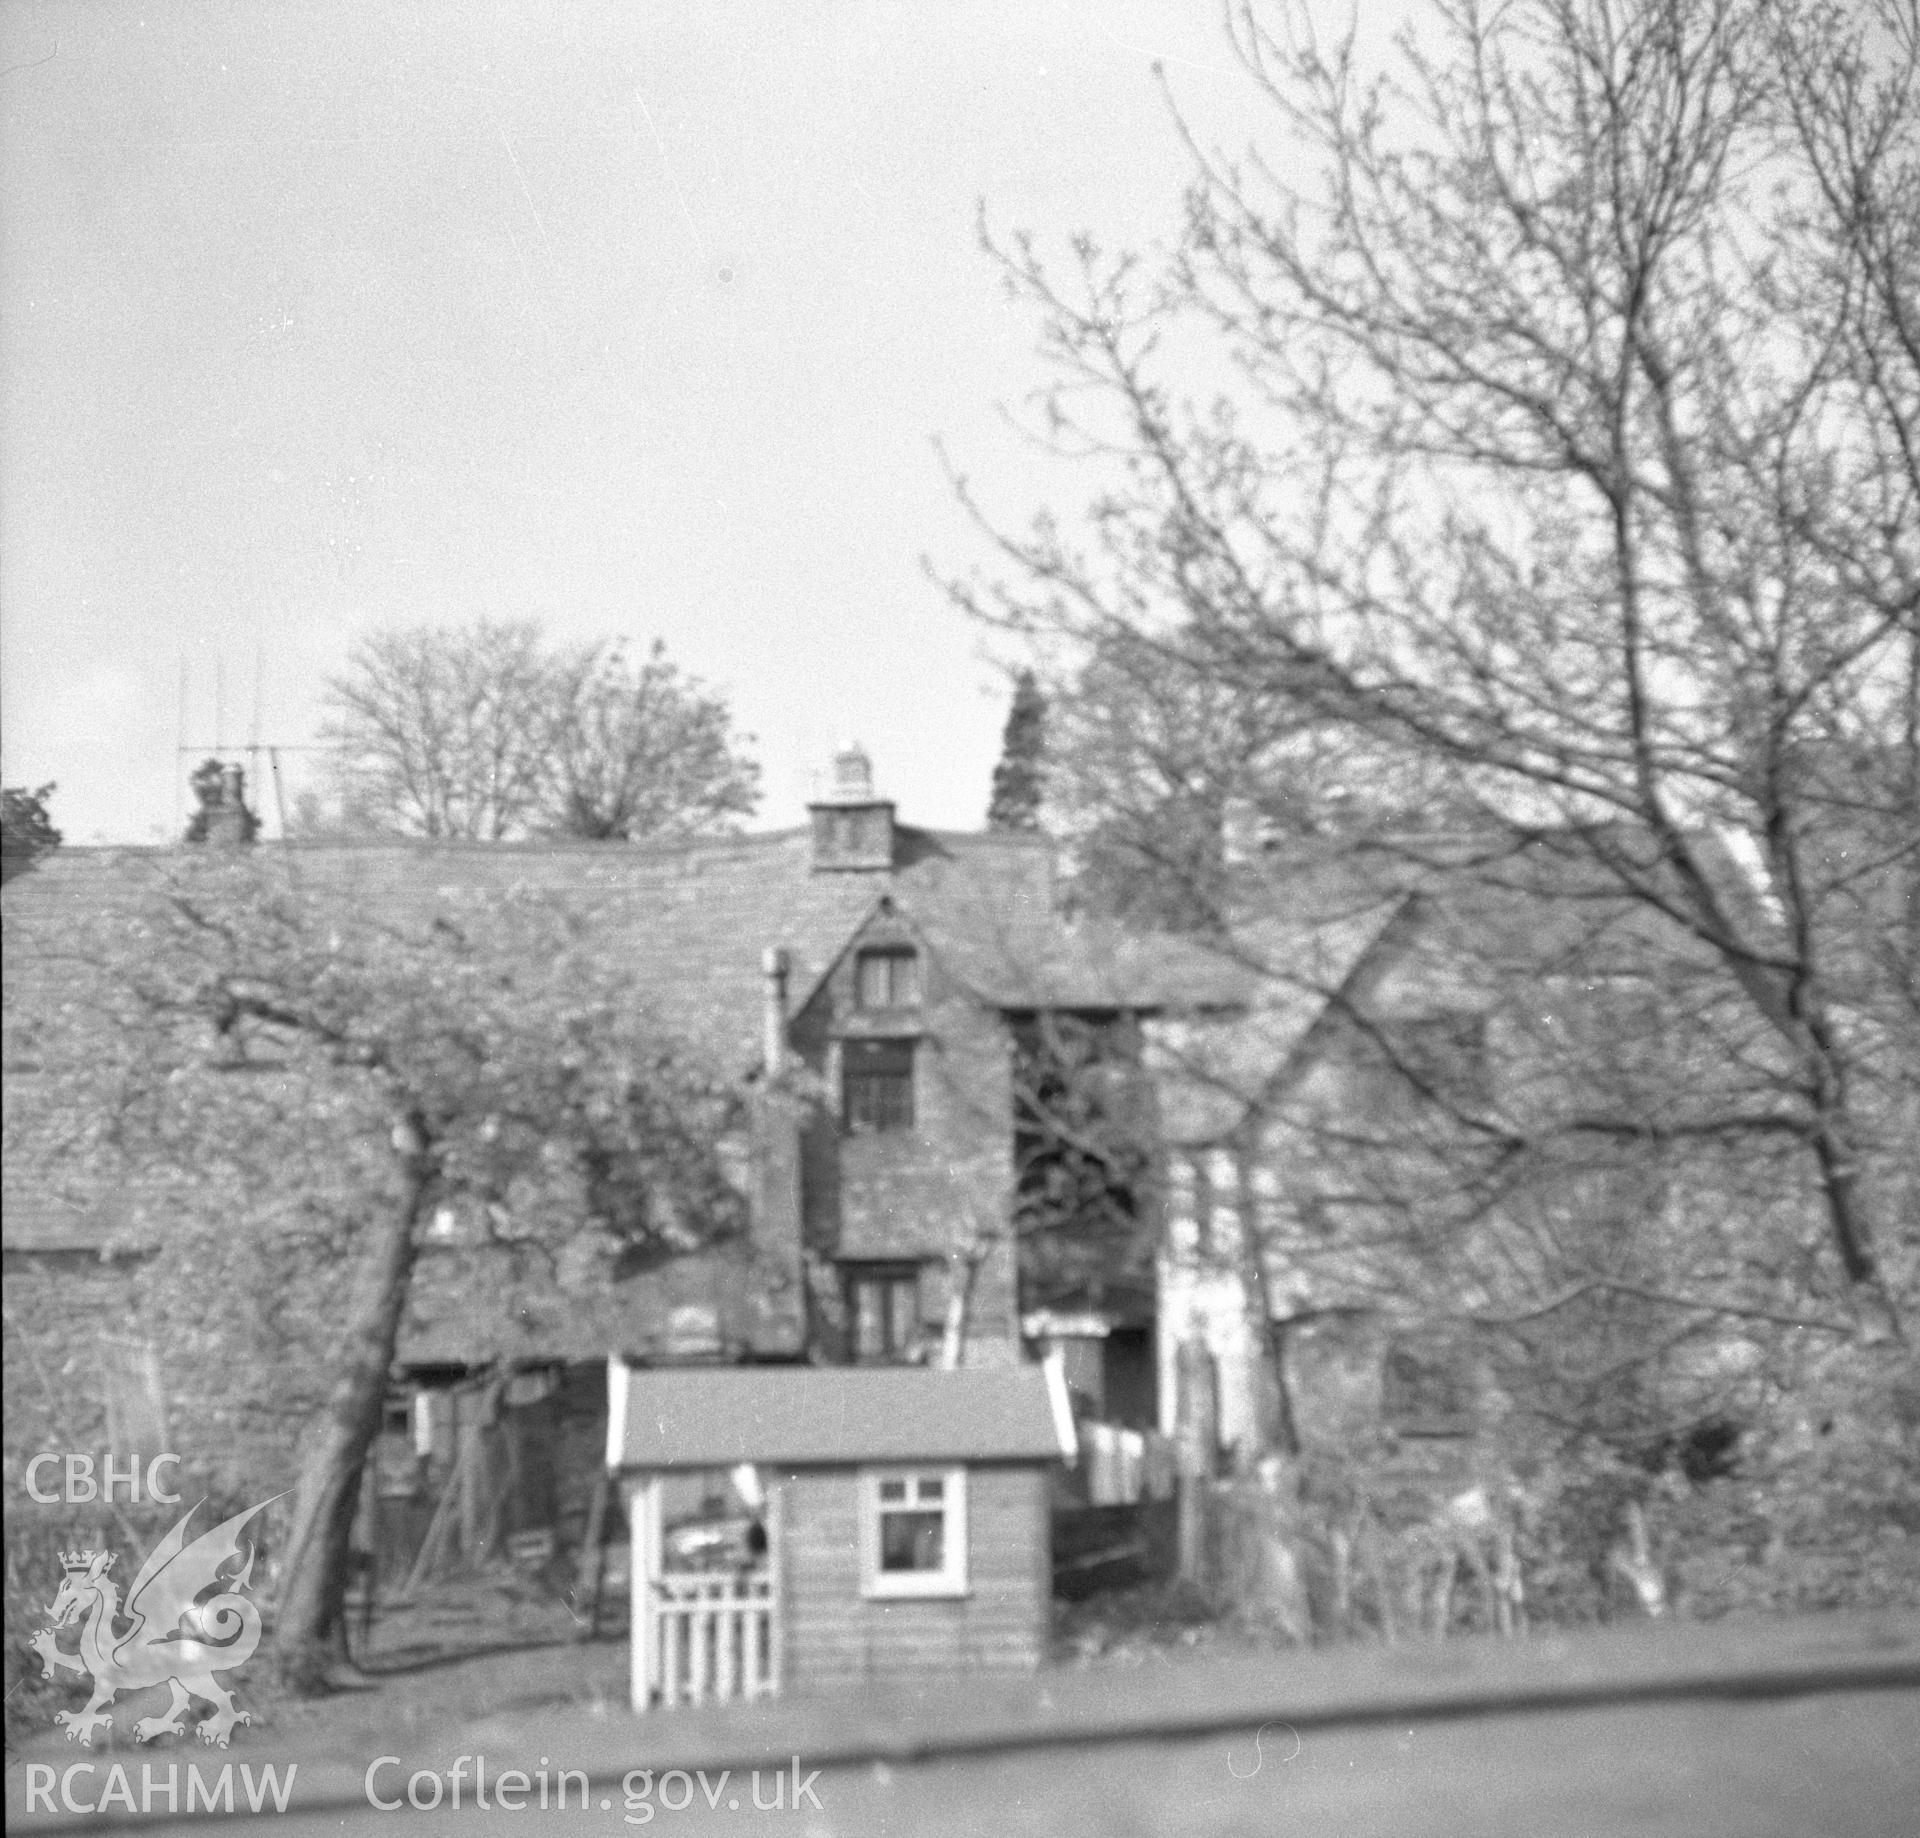 Digital copy of an undated nitrate negative showing rear view of 40 Cross Street, Abergavenny.